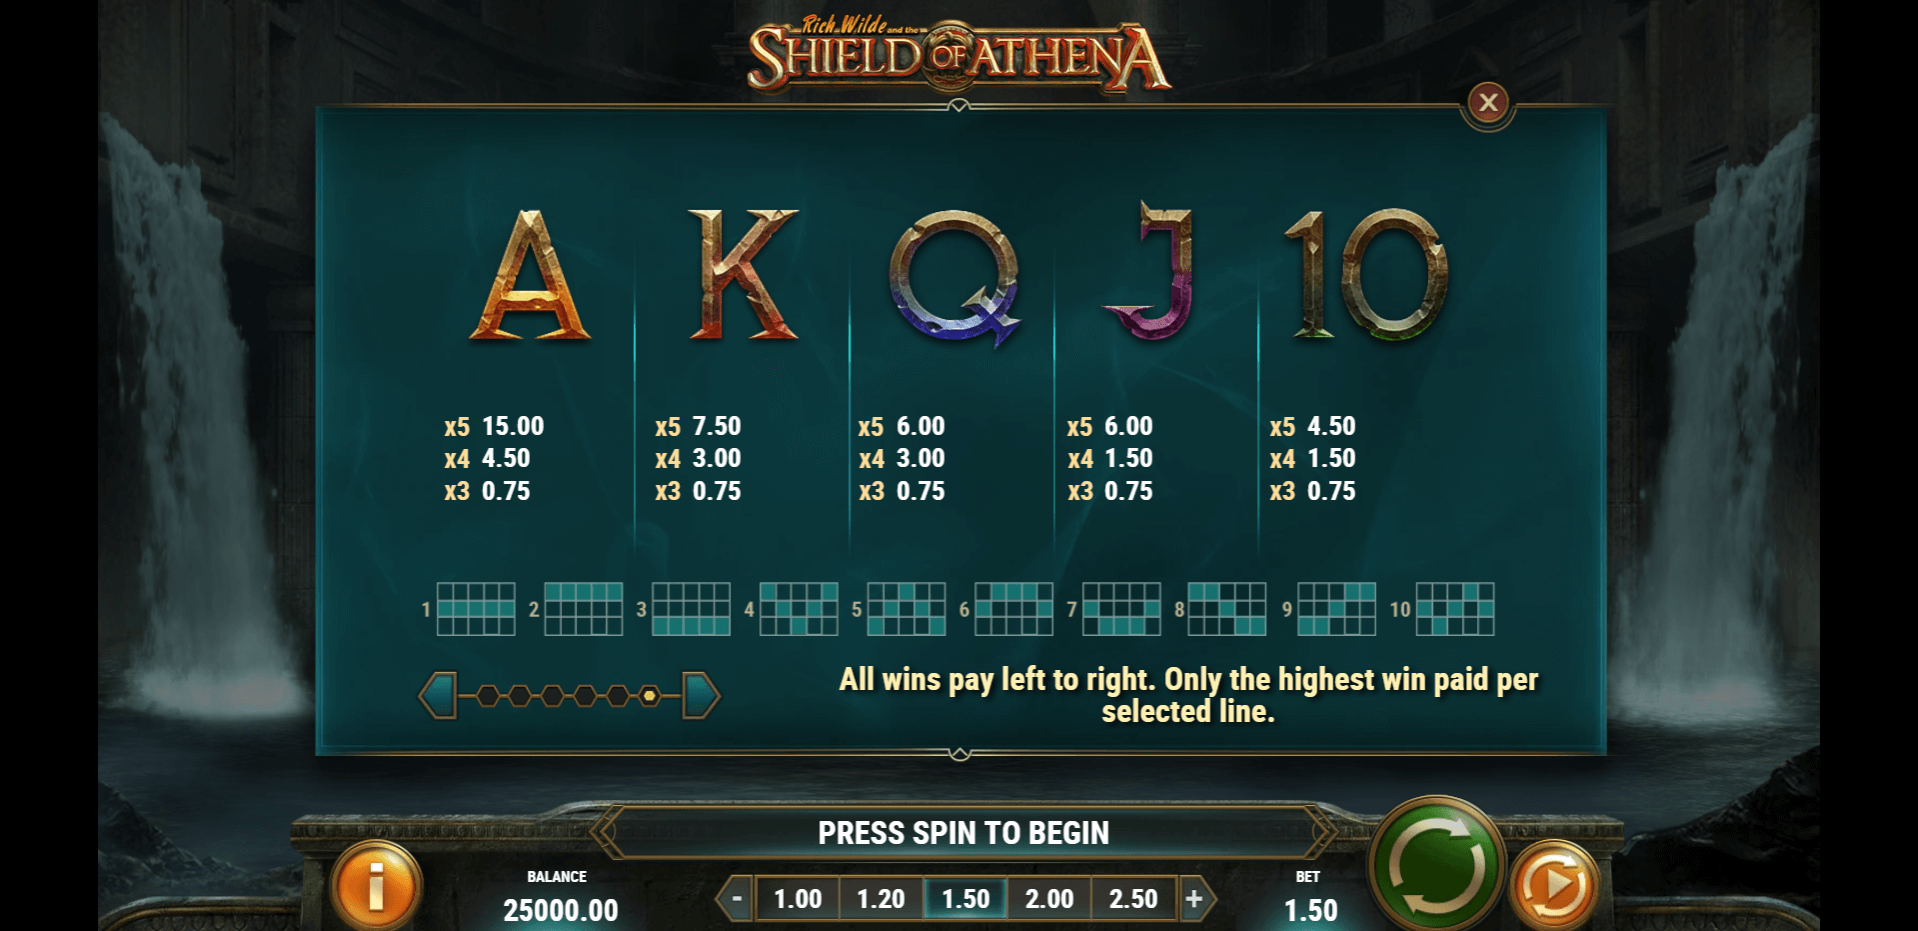 rich wilde and the shield of athena slot machine detail image 5